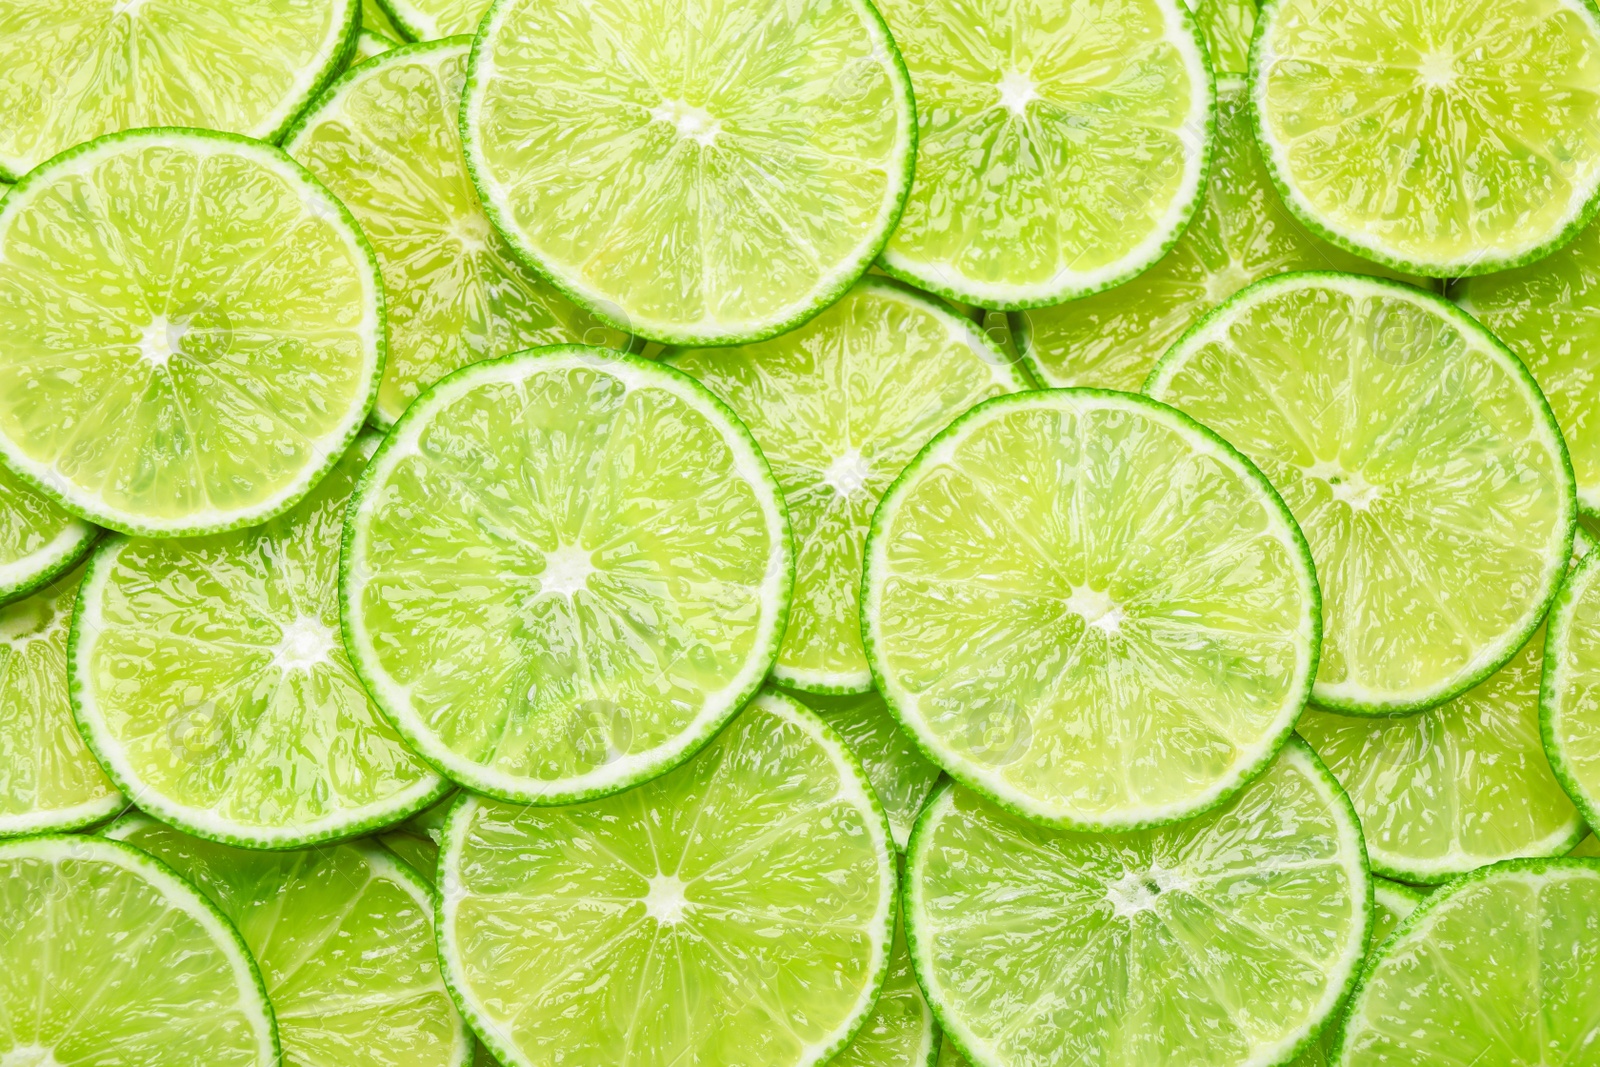 Photo of Many fresh juicy lime slices as background, top view